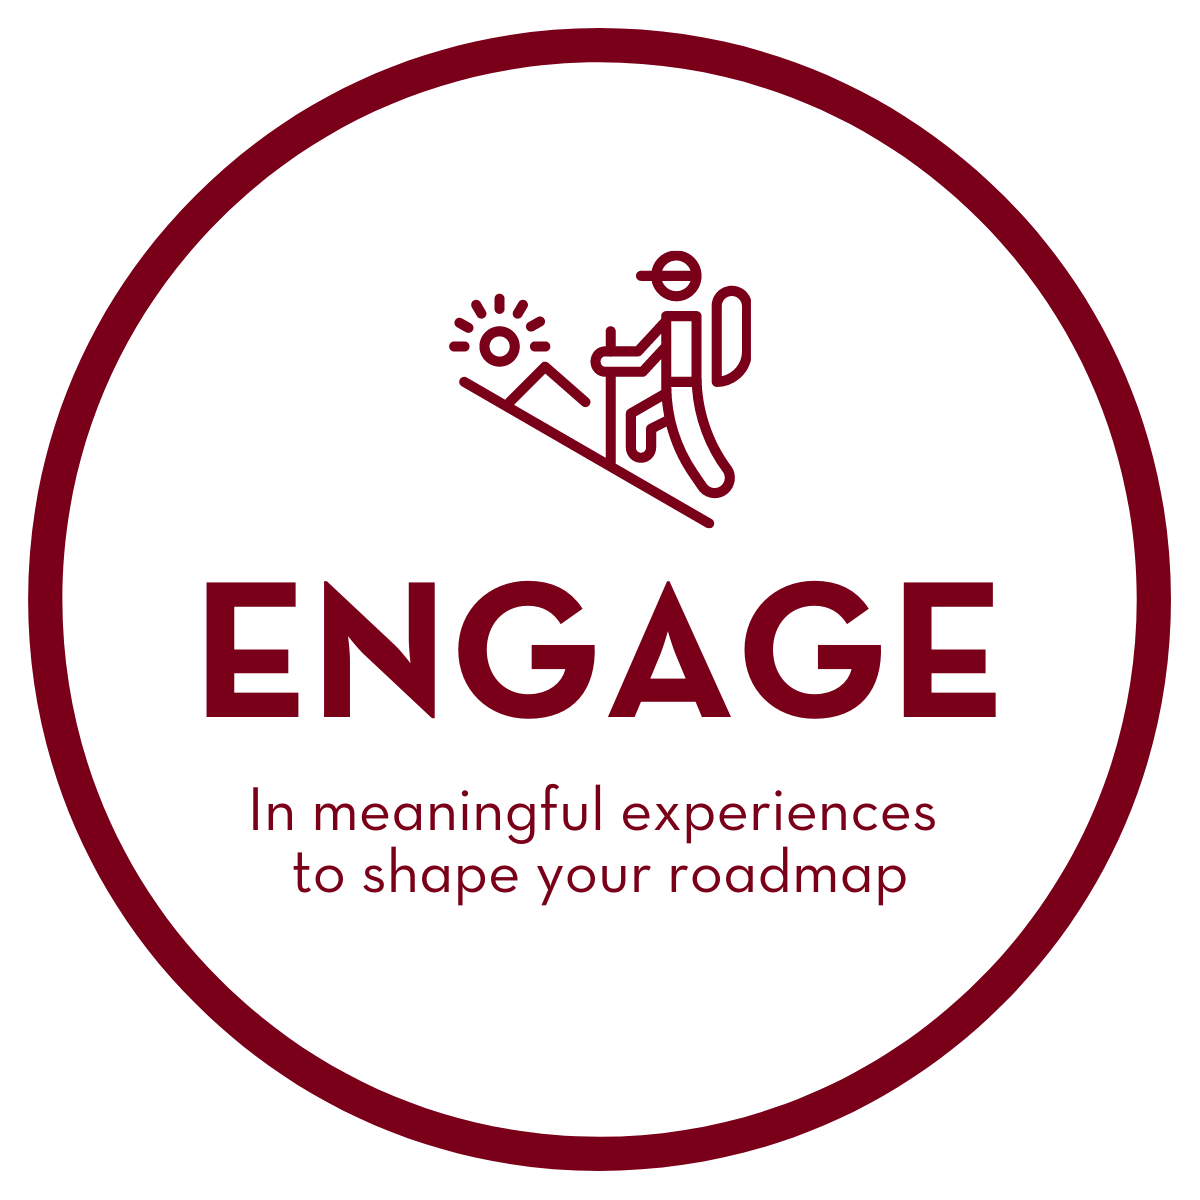 Engage Graphic with text - Engage: In meaningful experiences to shape your roadmap.